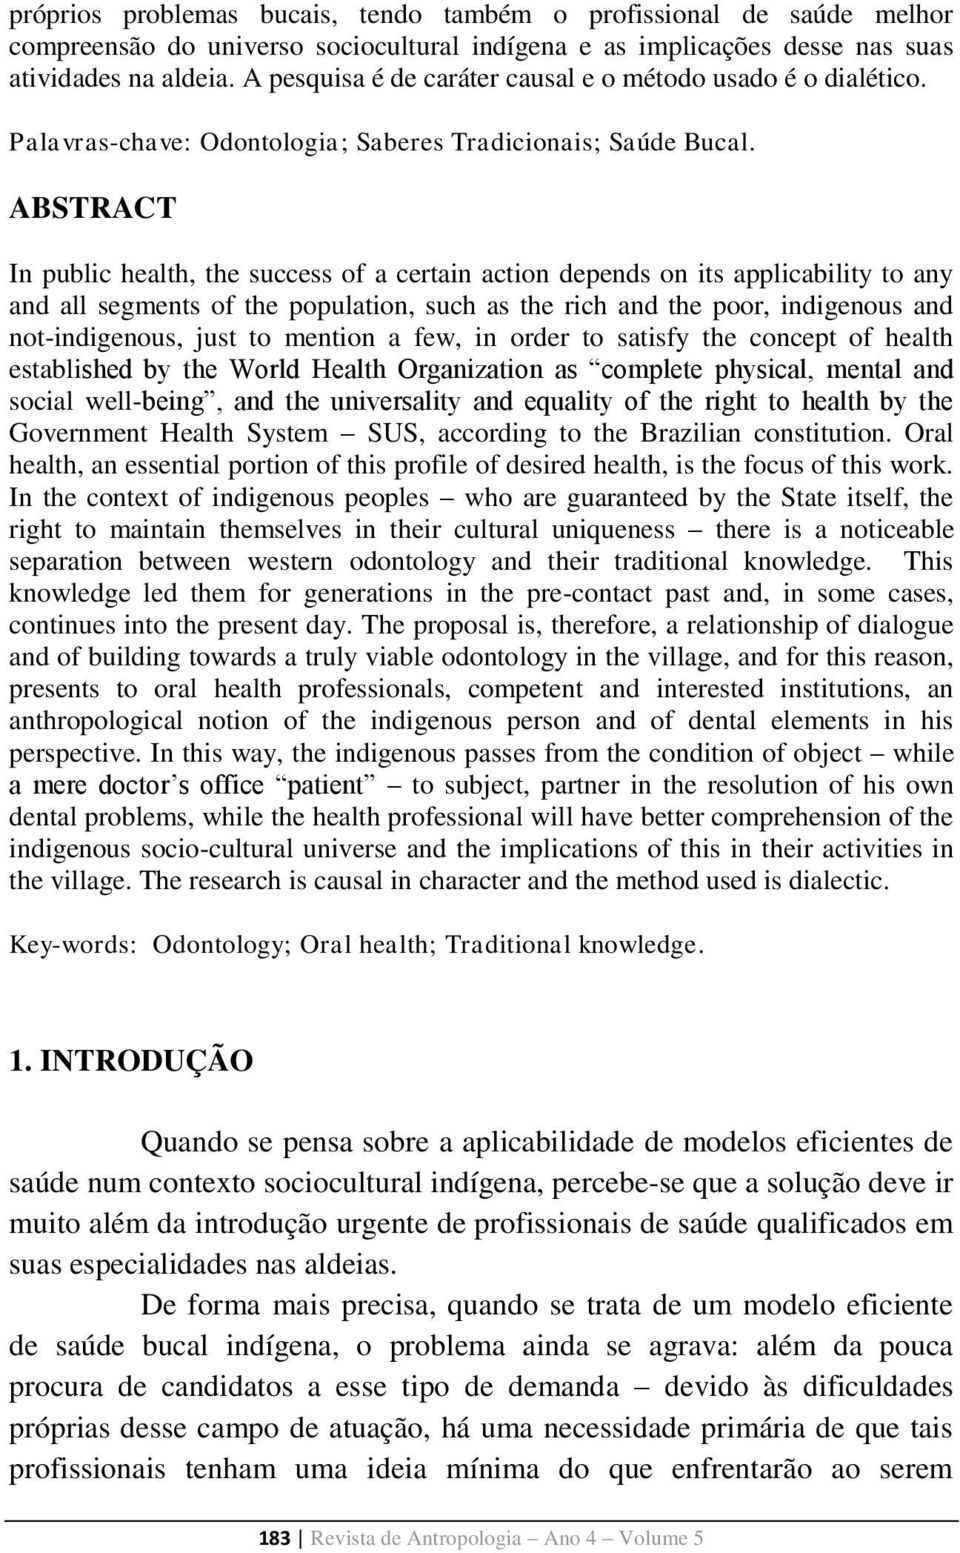 ABSTRACT In public health, the success of a certain action depends on its applicability to any and all segments of the population, such as the rich and the poor, indigenous and not-indigenous, just